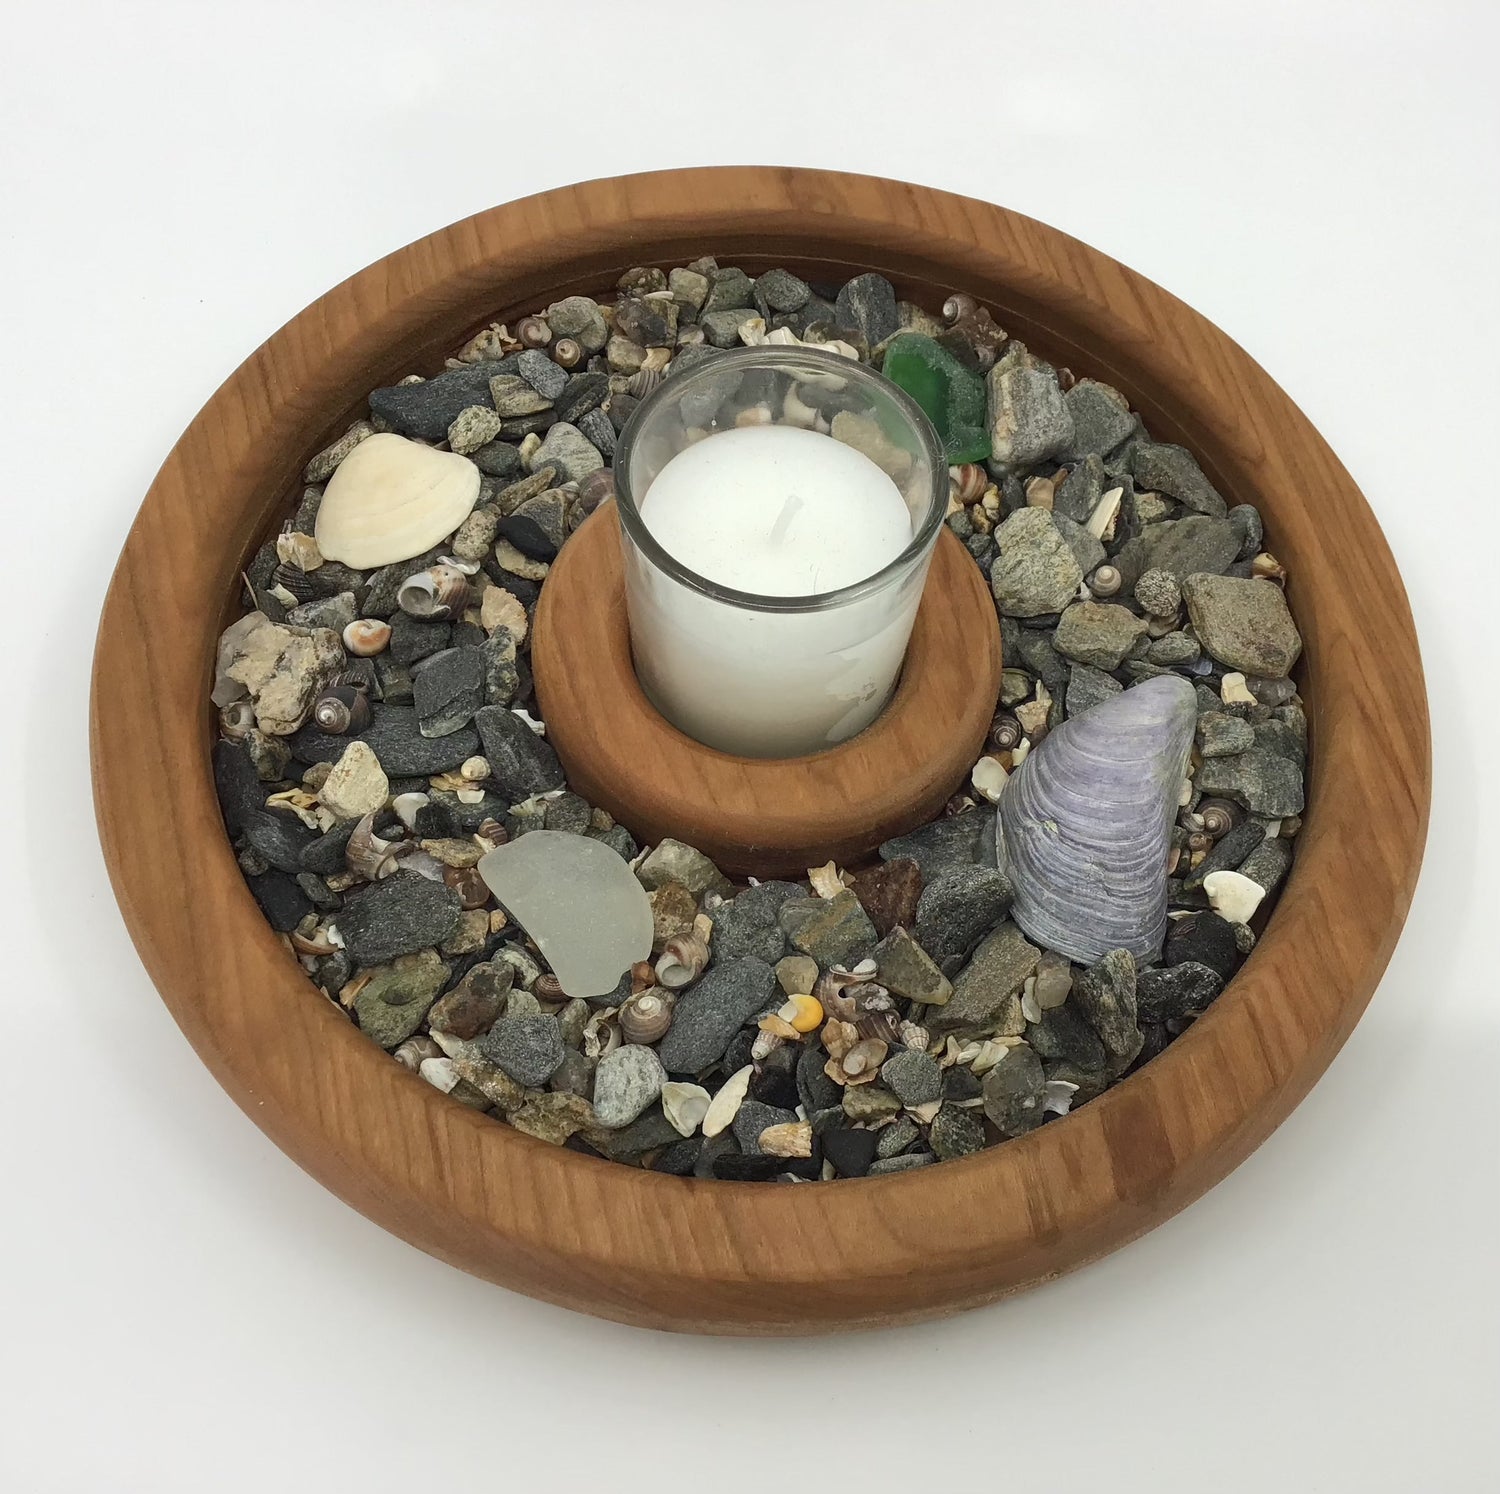 Moshier Island Woodworks' solid cherry wooden candle votive with small candle among rocks and shells